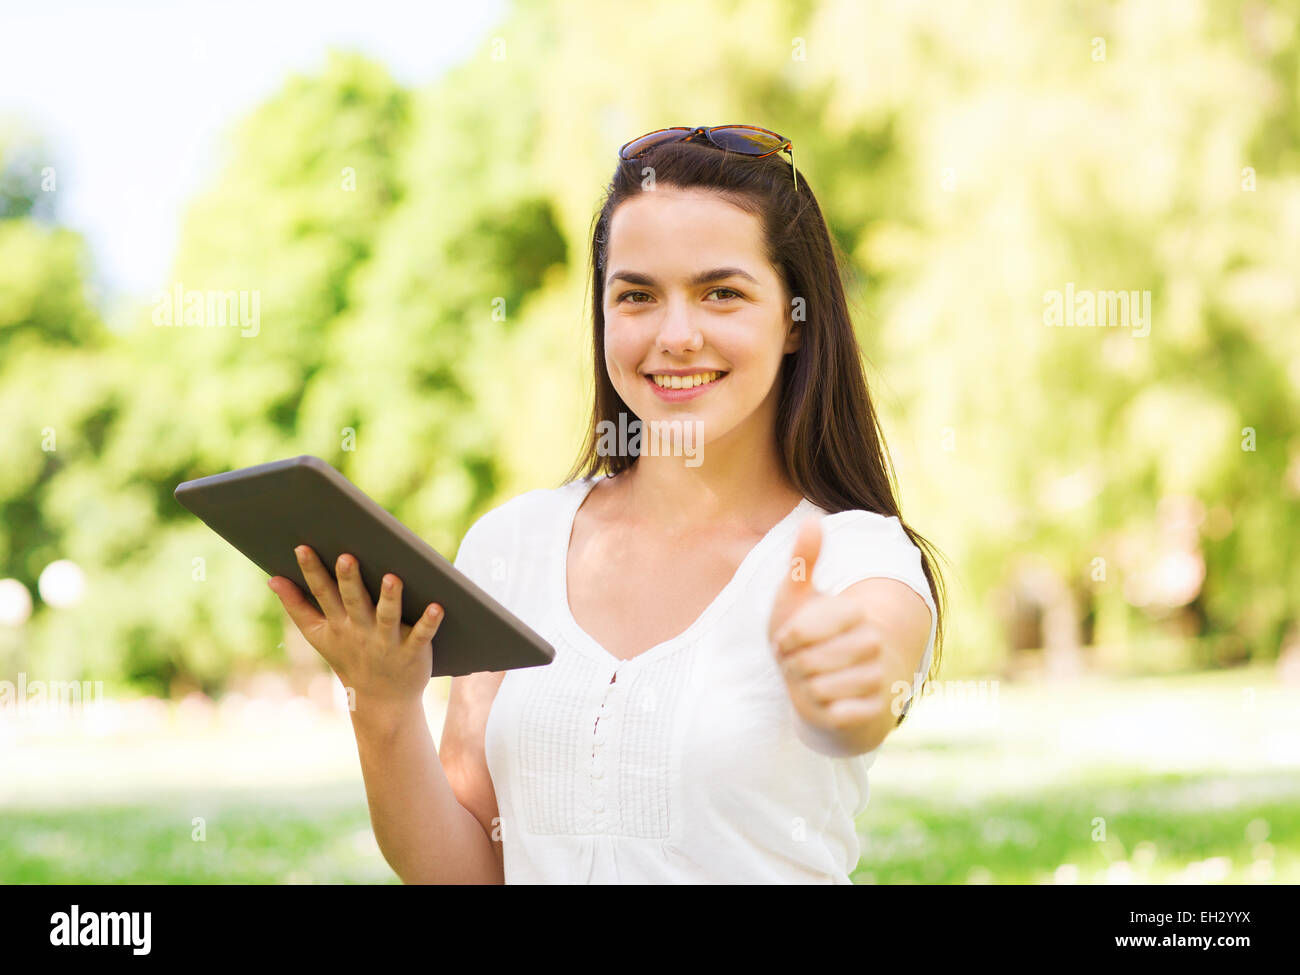 Smiling young girl with tablet pc sitting on grass Banque D'Images